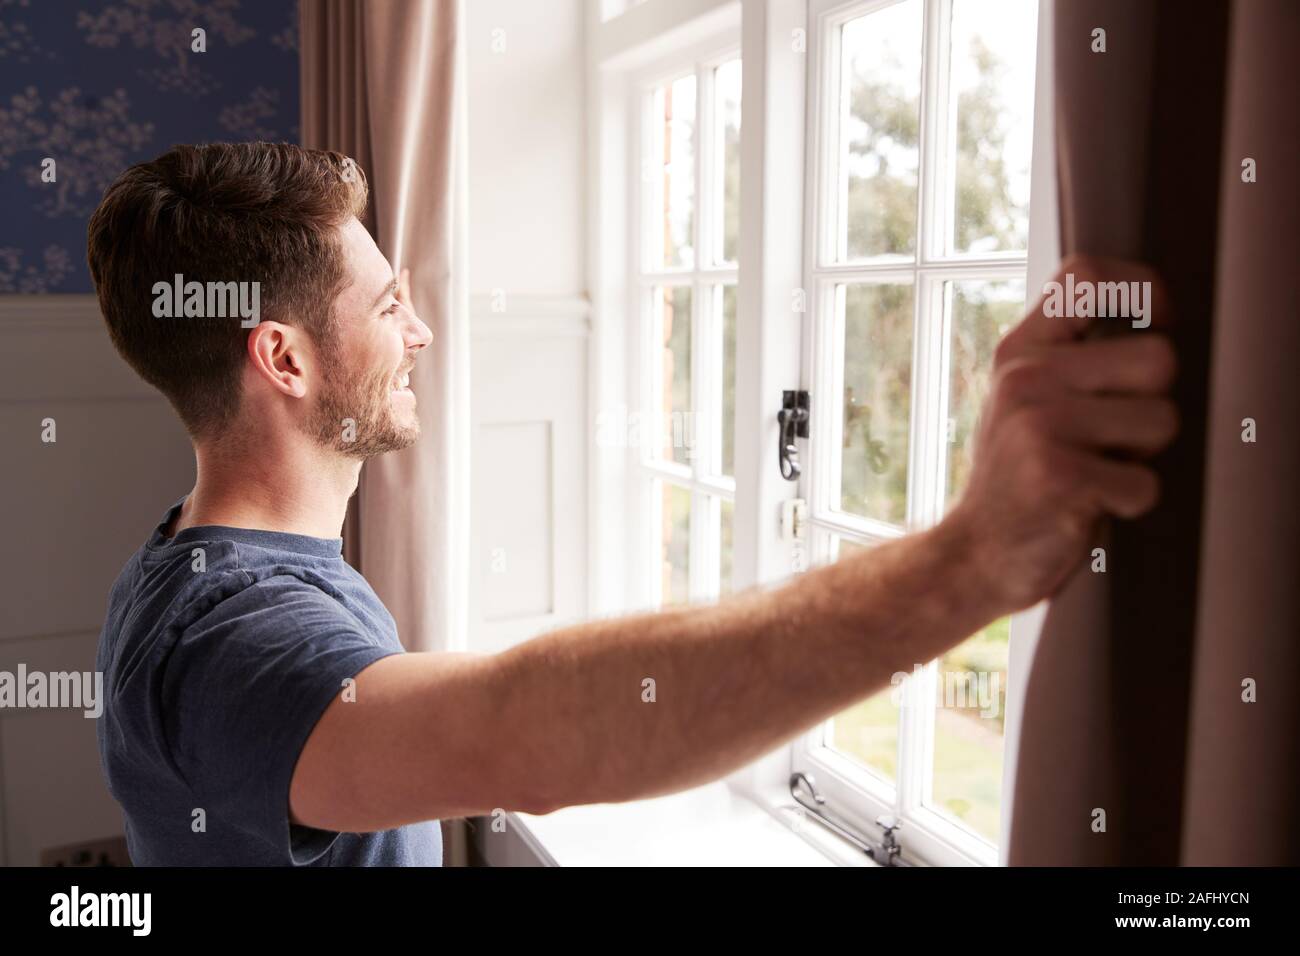 Man Wearing Pajamas Opening Bedroom Curtains At Start Of New Day Stock Photo